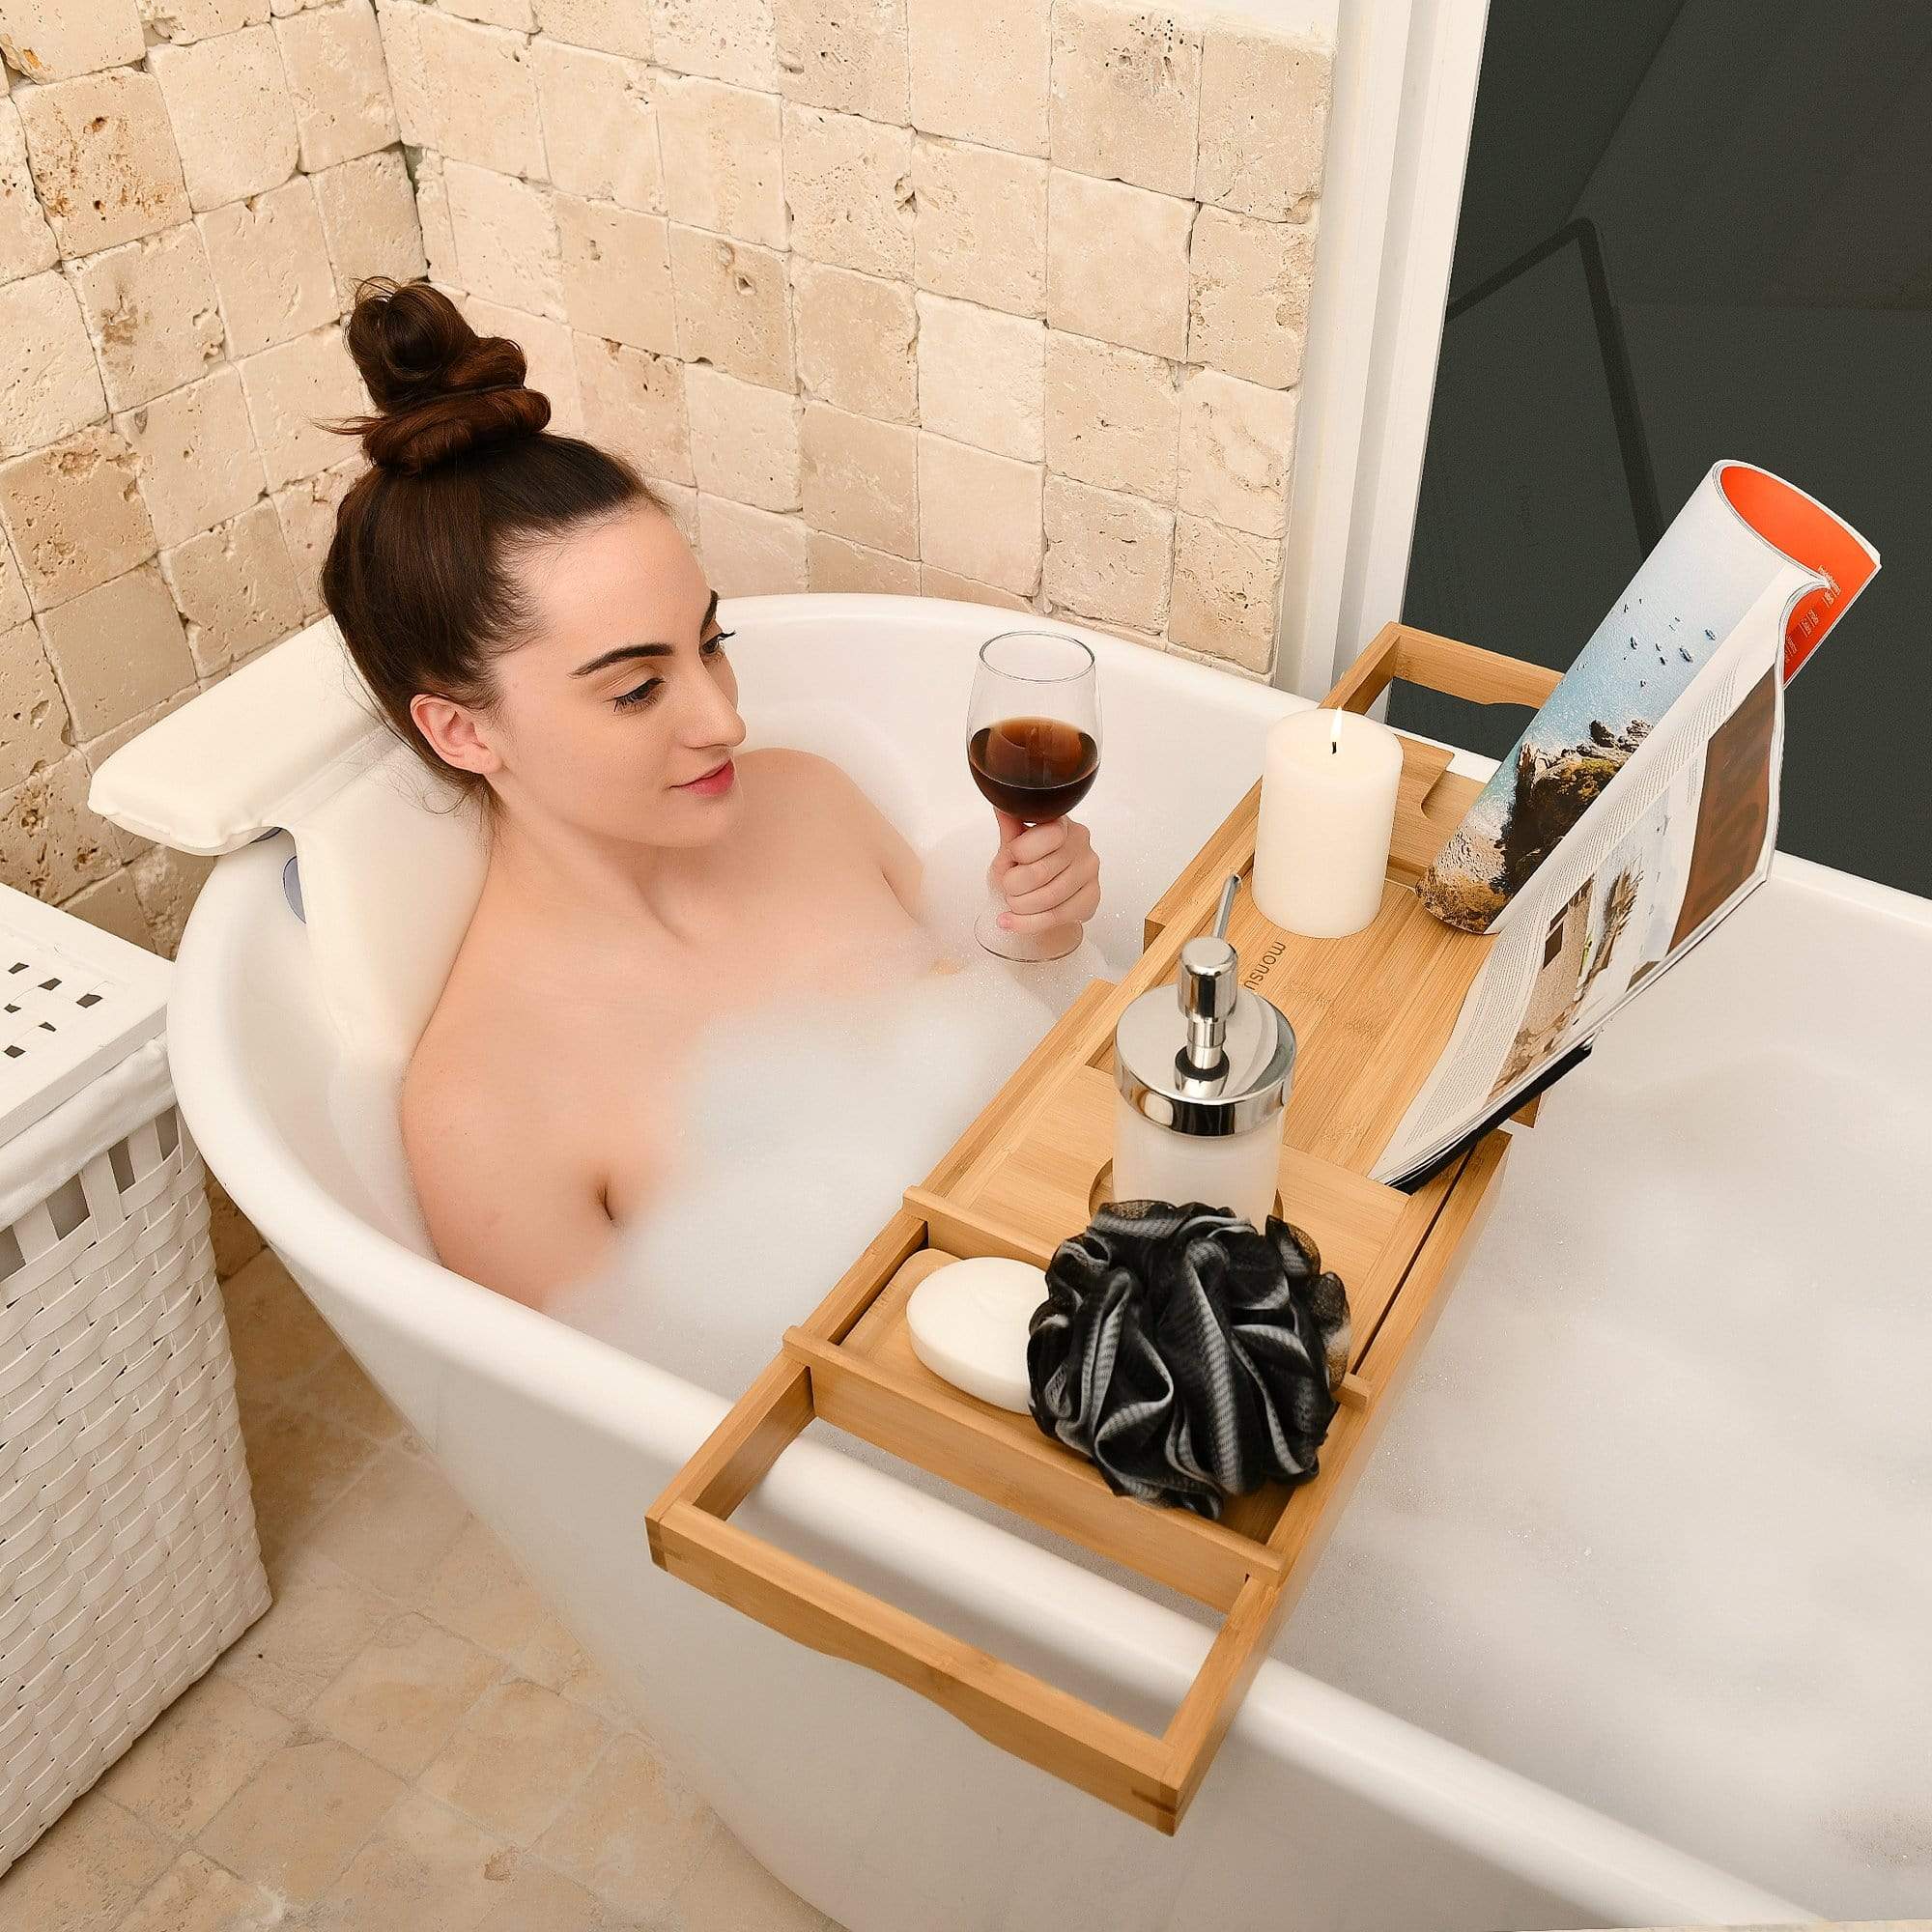 Monsuri Bath Caddy Tray for Tub: Bamboo Bathtub Tray Caddy Expandable with Wine Glass Holder and Book Stand. Luxury Bubble Bath Accessor